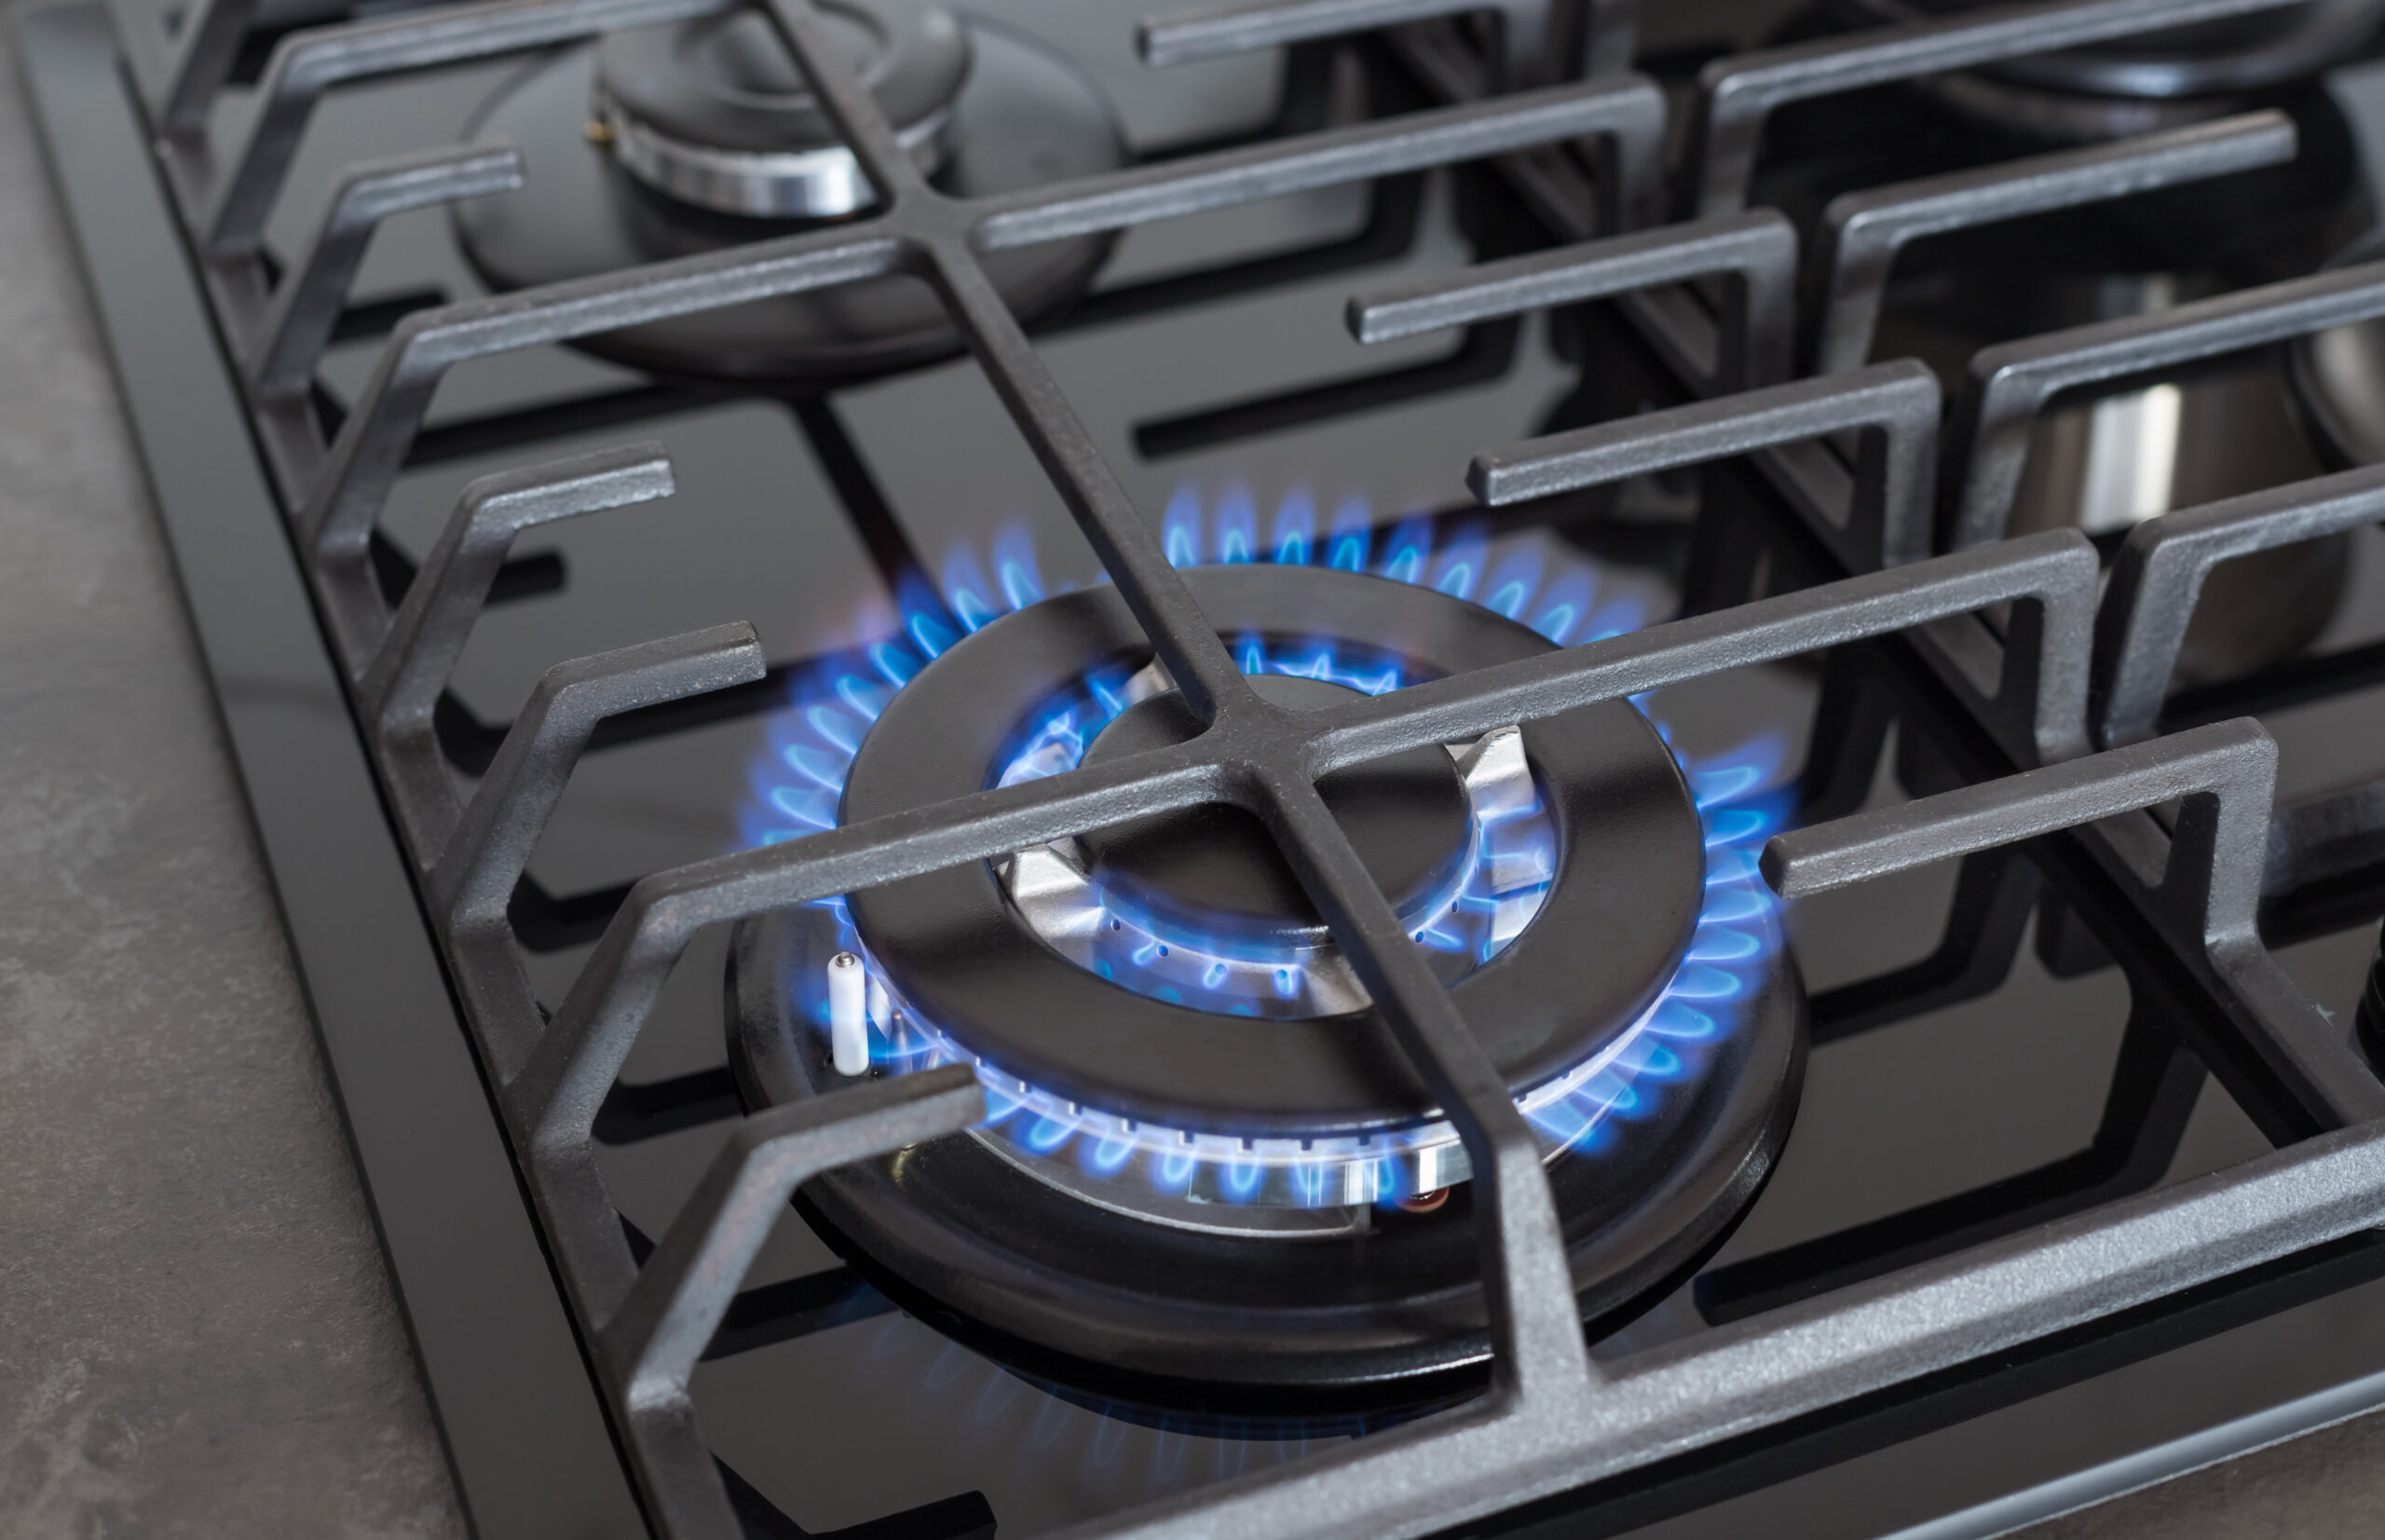 gas-stove-burner-with-blue-flames-natural-gas-supply-modern-household-appliance-scaled-1.jpg